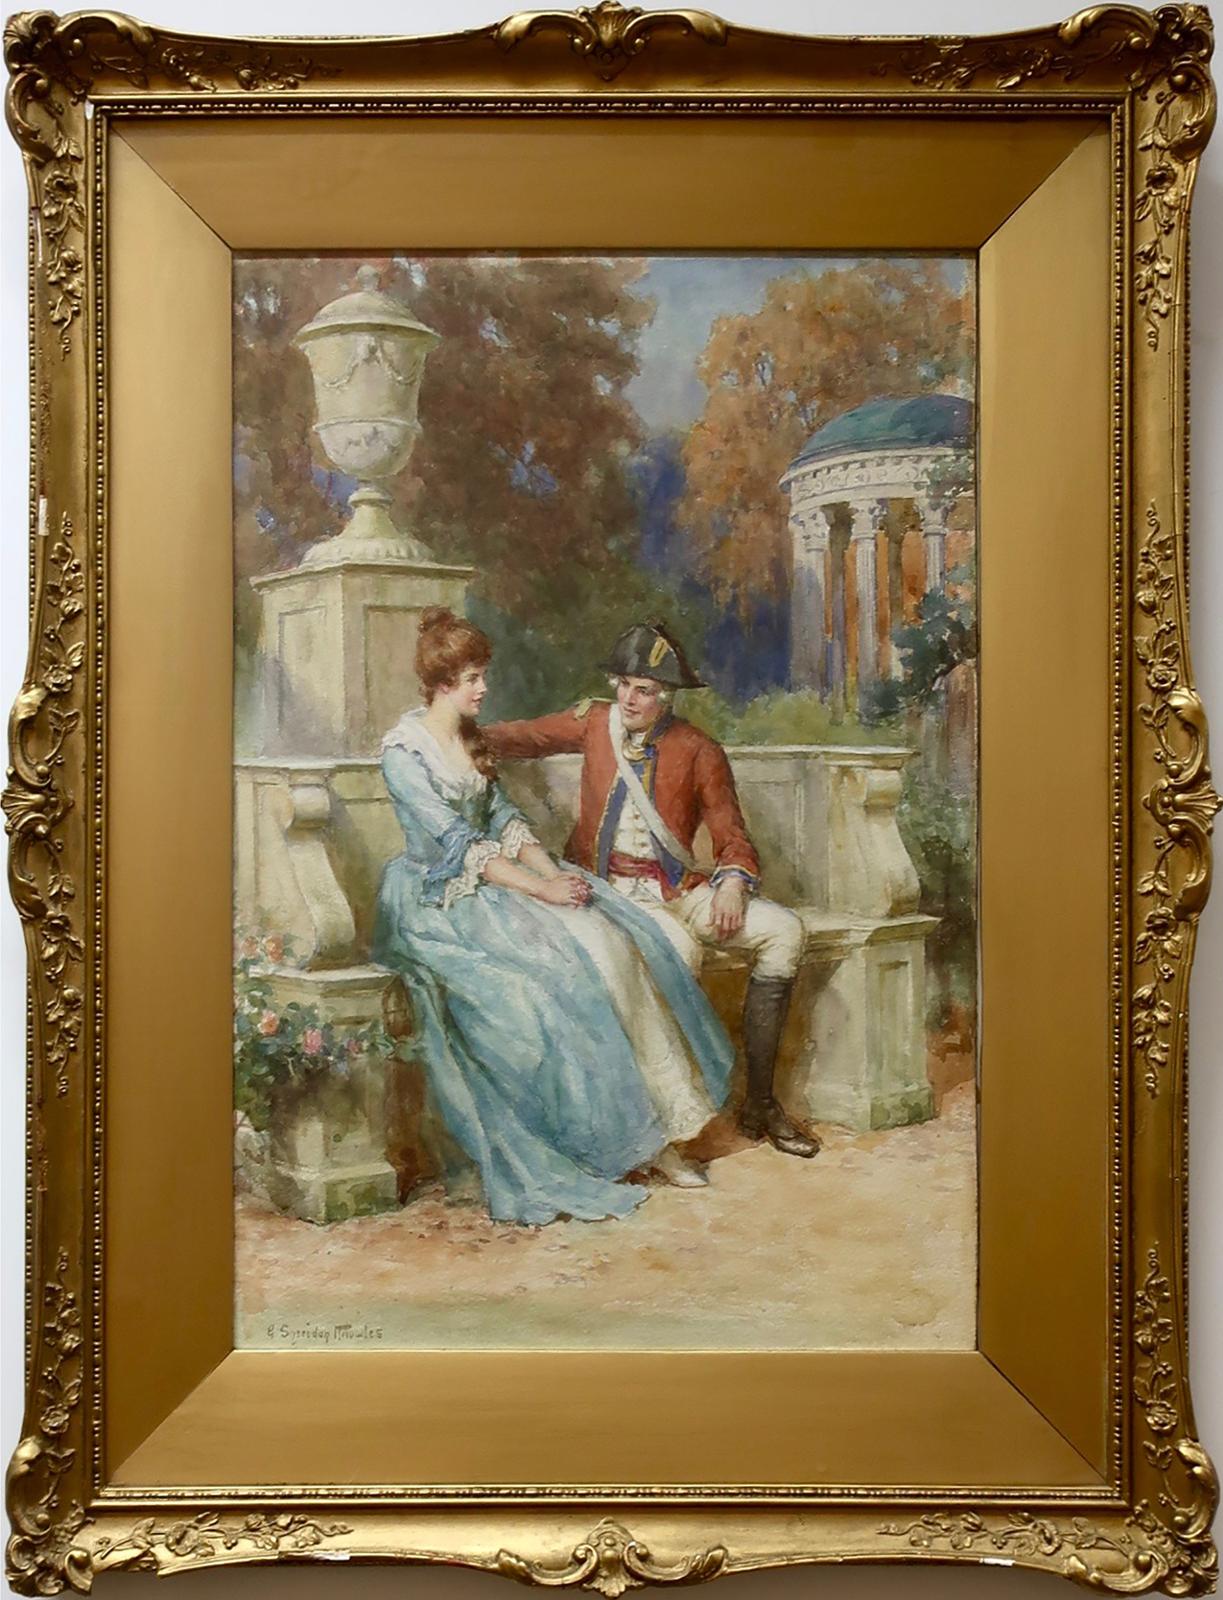 George Sheridan Knowles (1863-1931) - The Officer And A Lady In A Garden Courtyard